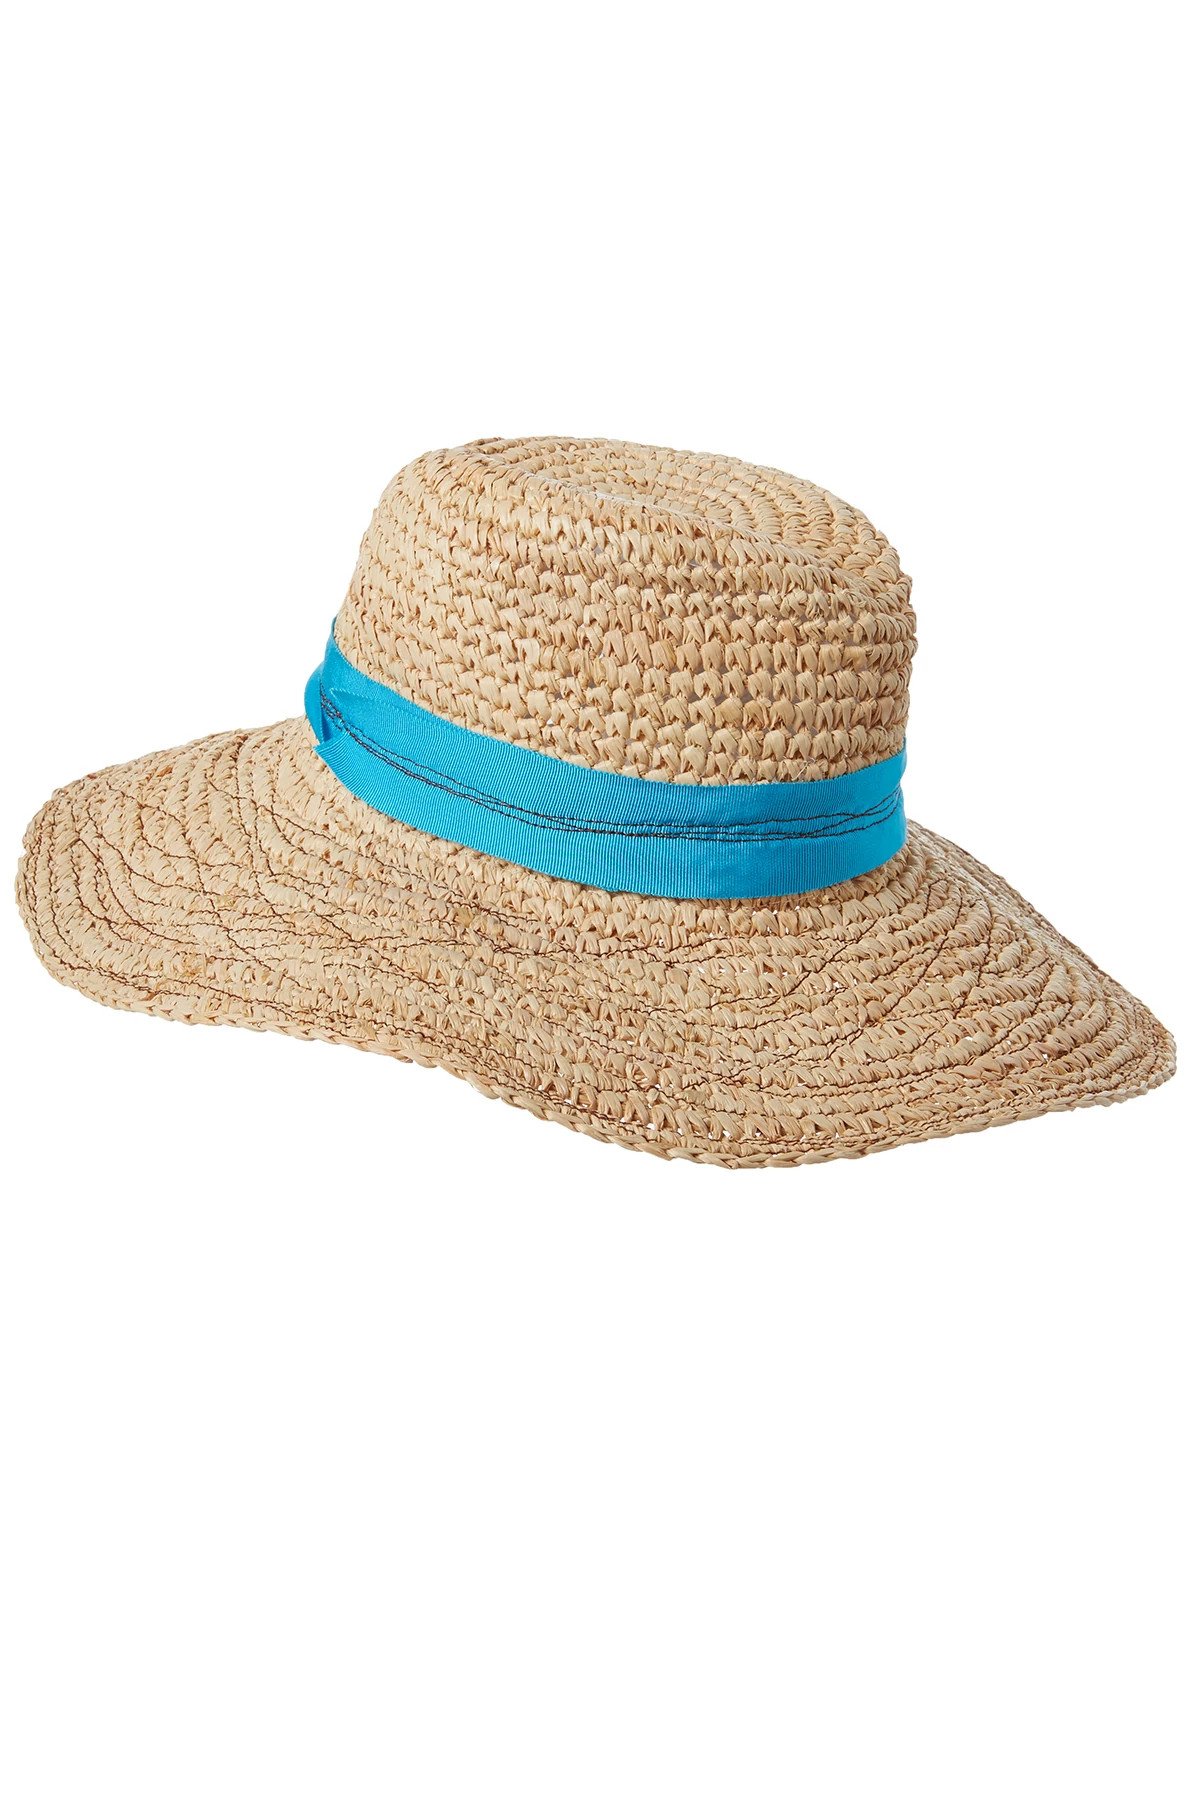 NATURAL/TURQUOISE/BLUE Mama Tarboush Topstitched Ribbon Hat image number 1